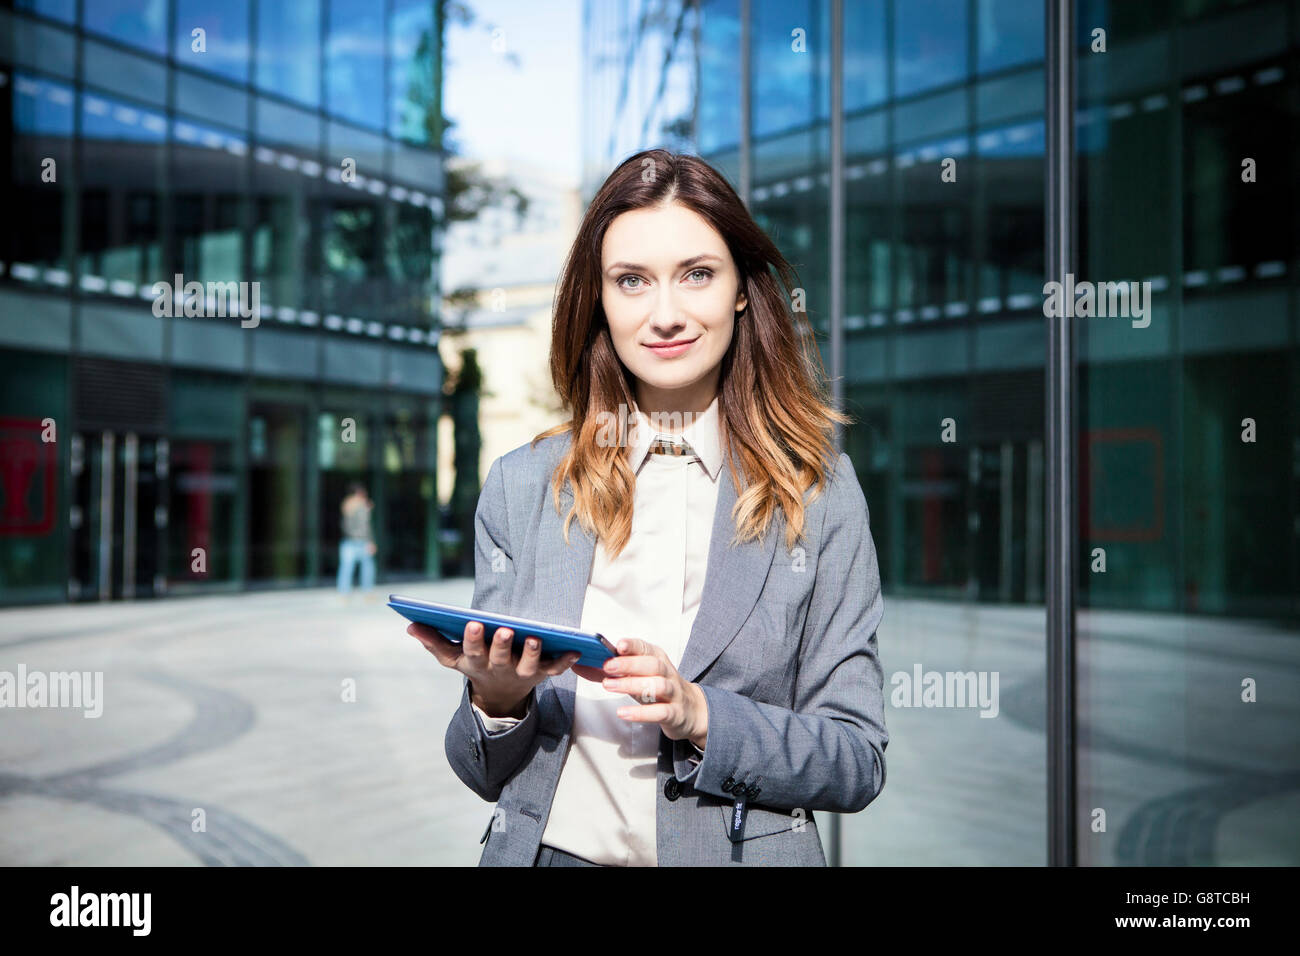 Business woman using digital tablet in city Stock Photo